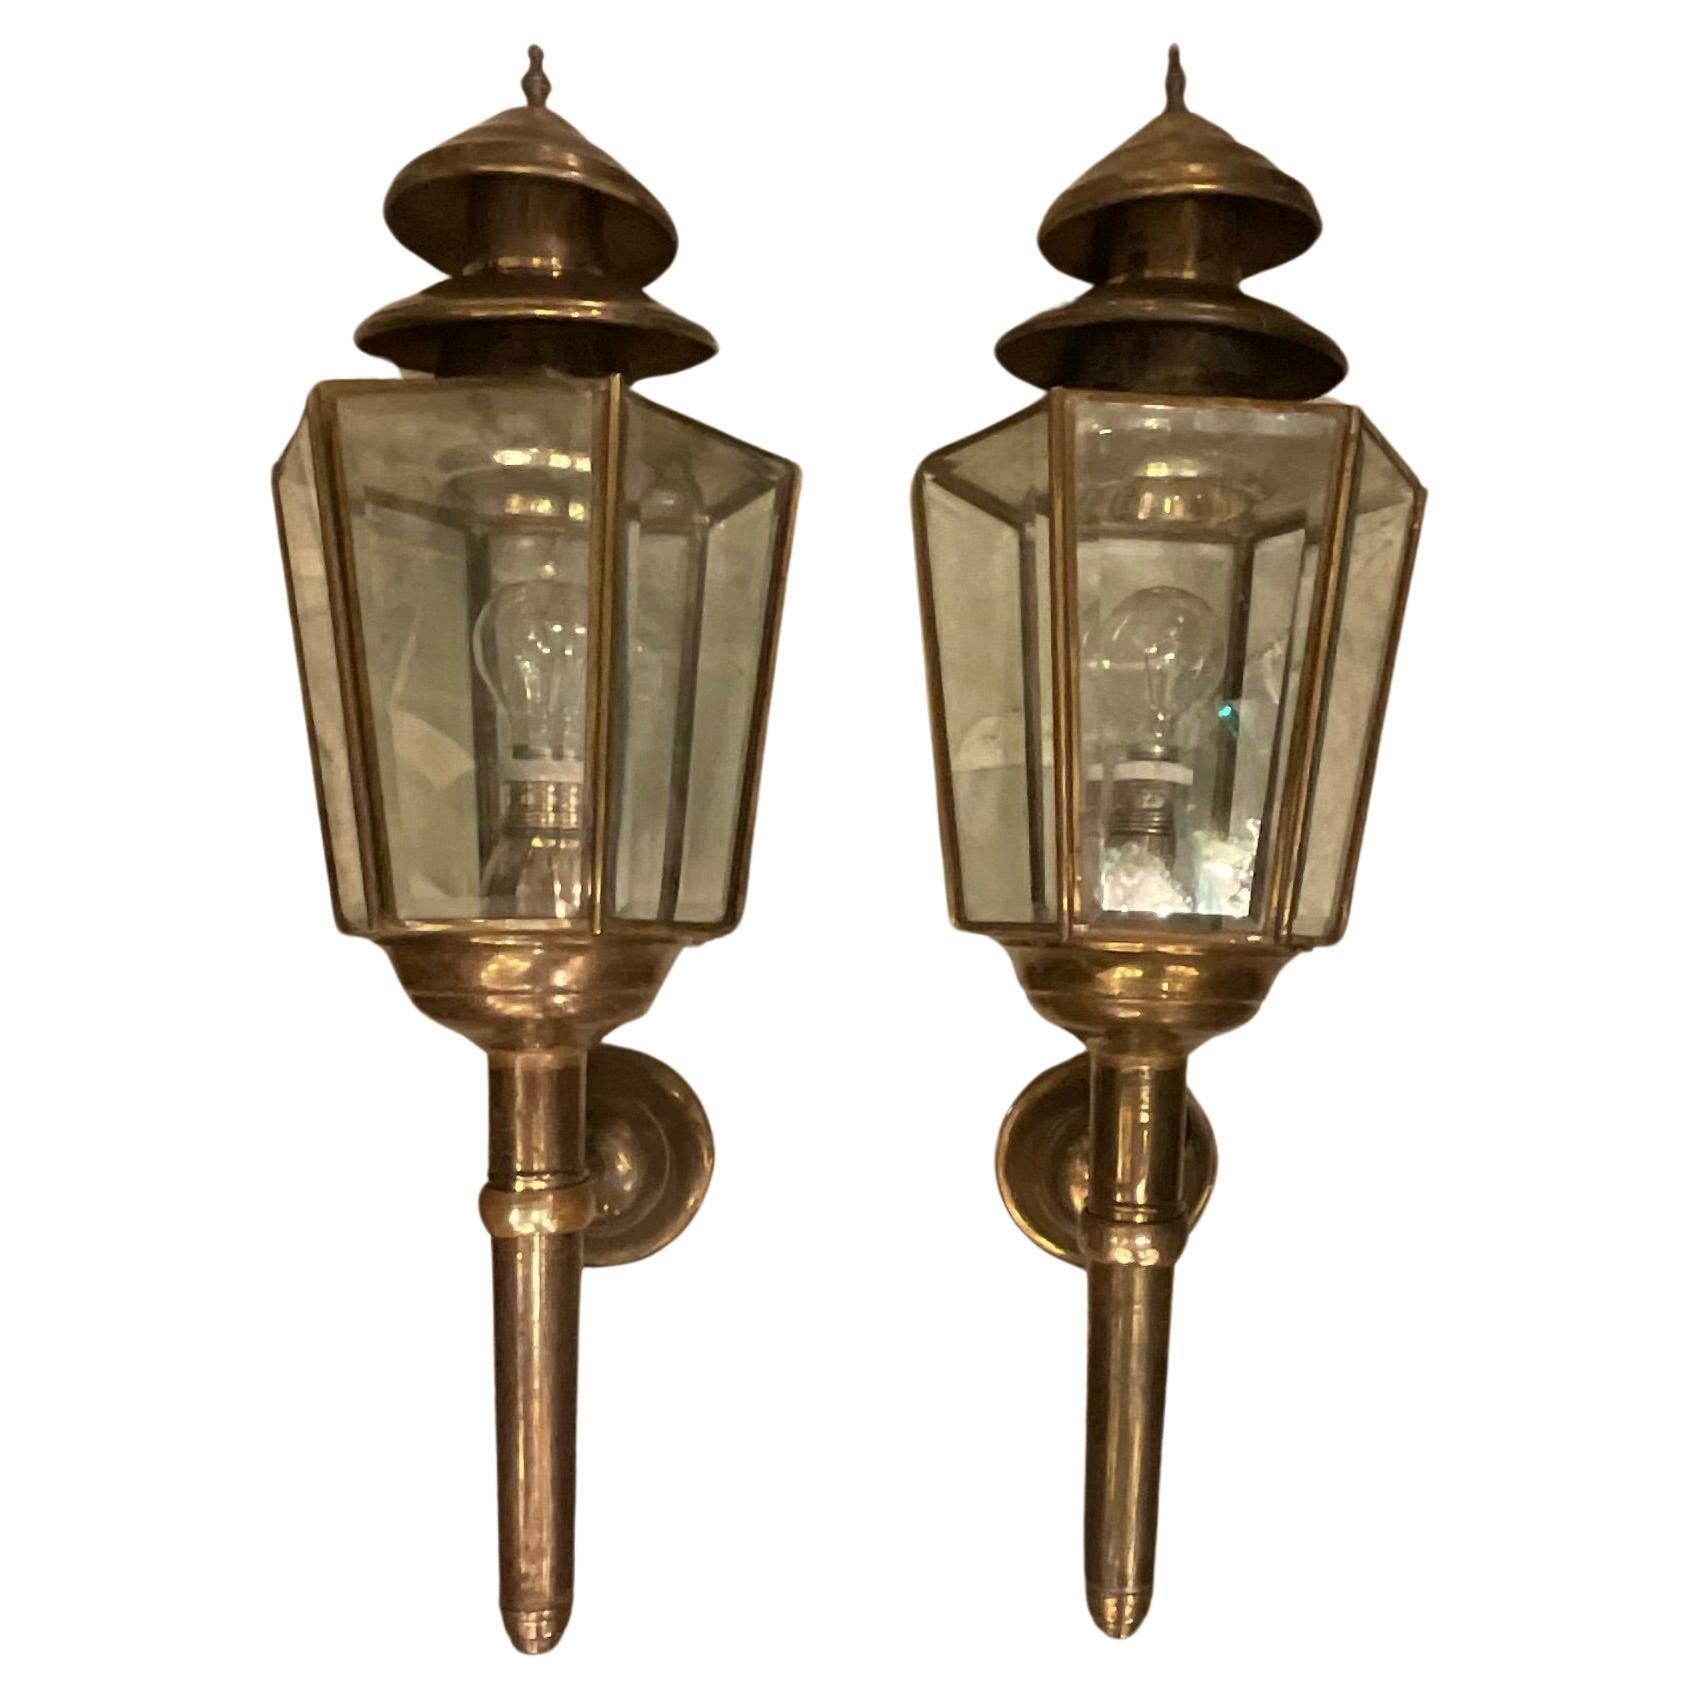 FONTANARTE - Peter Church - Great Couple  of wall sconces - 1950 For Sale